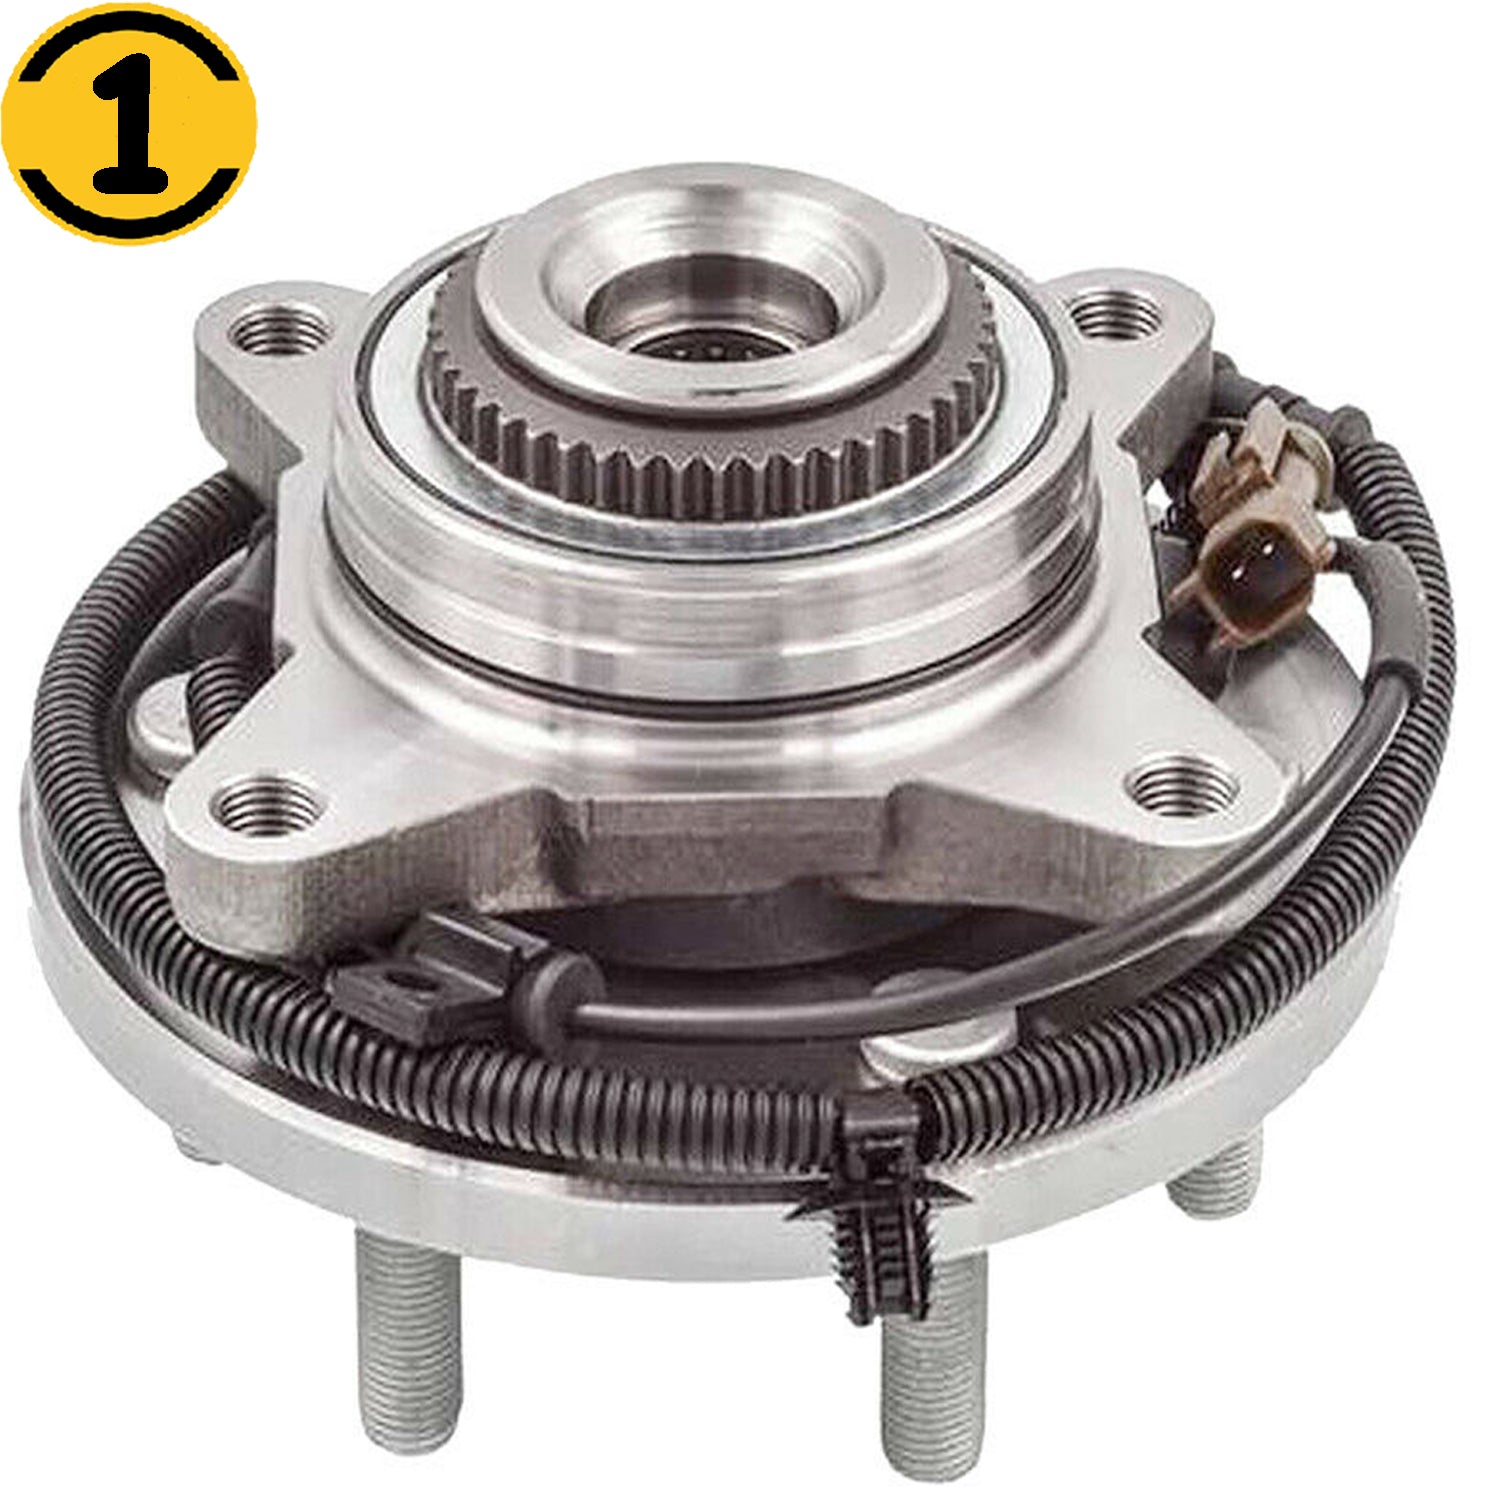 MotorbyMotor 515169 Front Wheel Bearing and Hub Assembly 4WD with 6 Lugs Fits for 2015-2017 Ford F-150 (2.7L 3.5L 5.0L Engines) Hub Bearing ( Will not Fit 6.2L or 6.2L Raptor ) MotorbyMotor